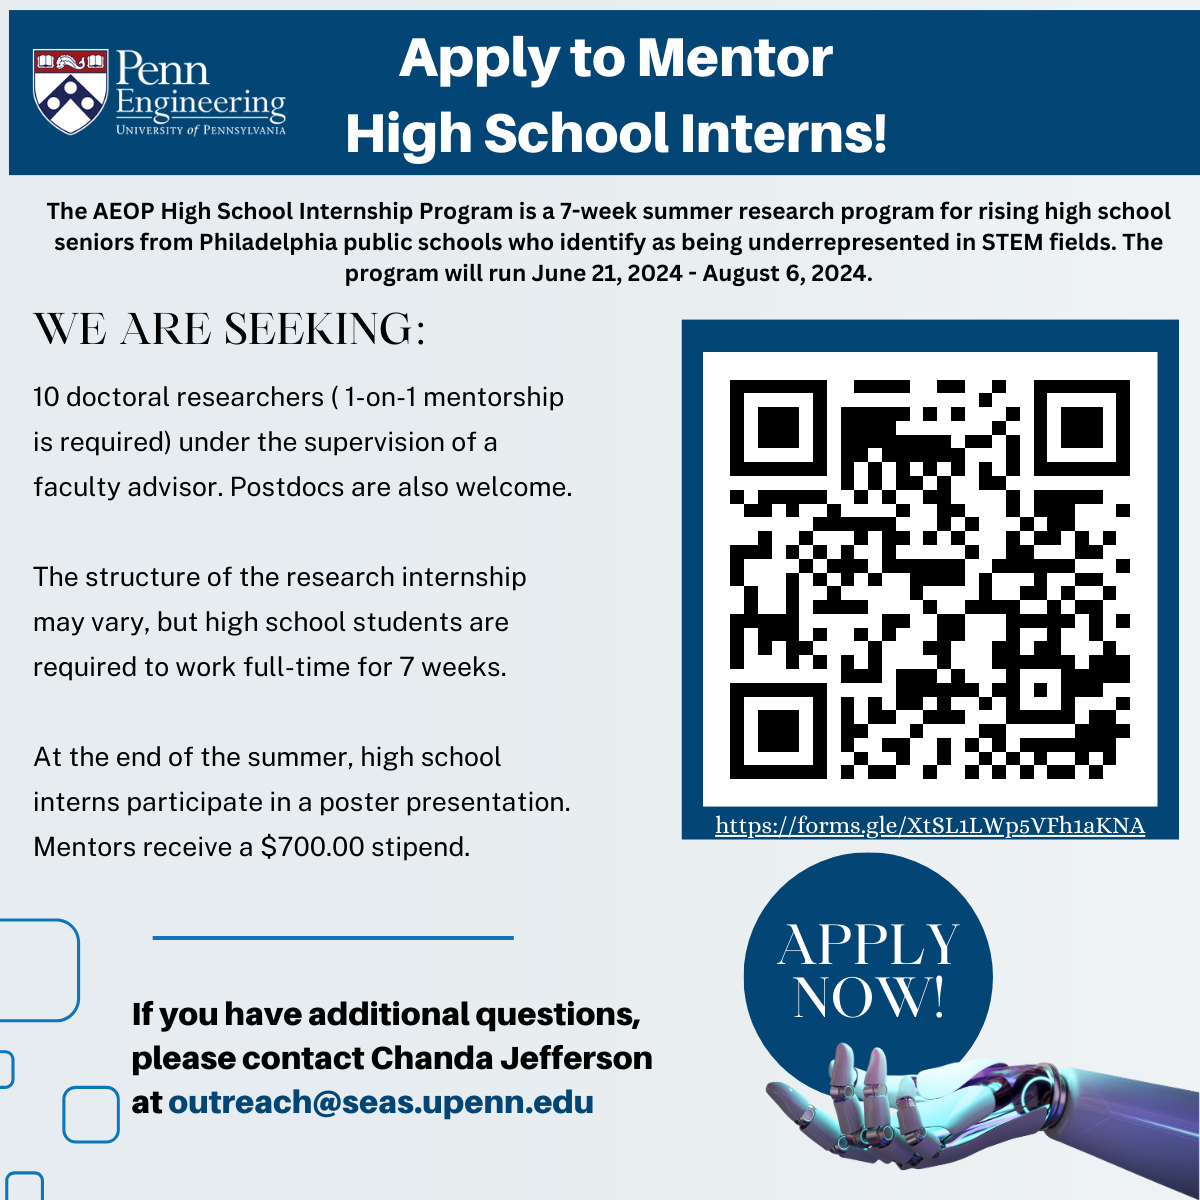 Flyer, Call for Applications for Penn Engineering Army Educational Outreach Program High School Internship. Apply to Mentor High School Interns!